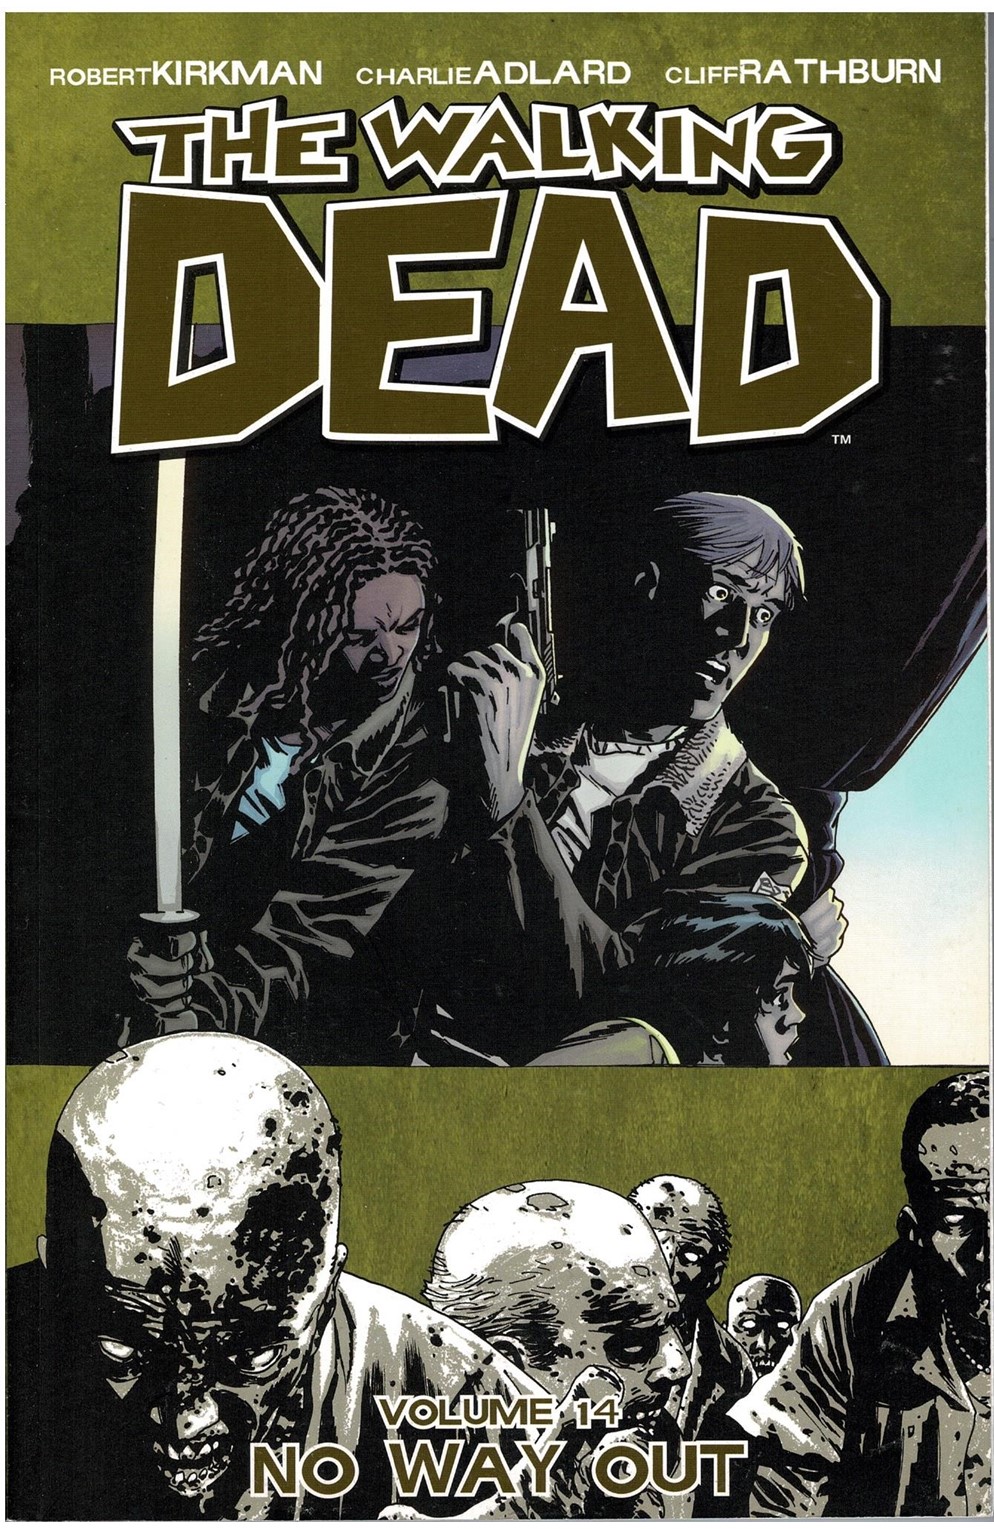 The Walking Dead Trade Paperback Volume 14 No Way Out - Half Off!